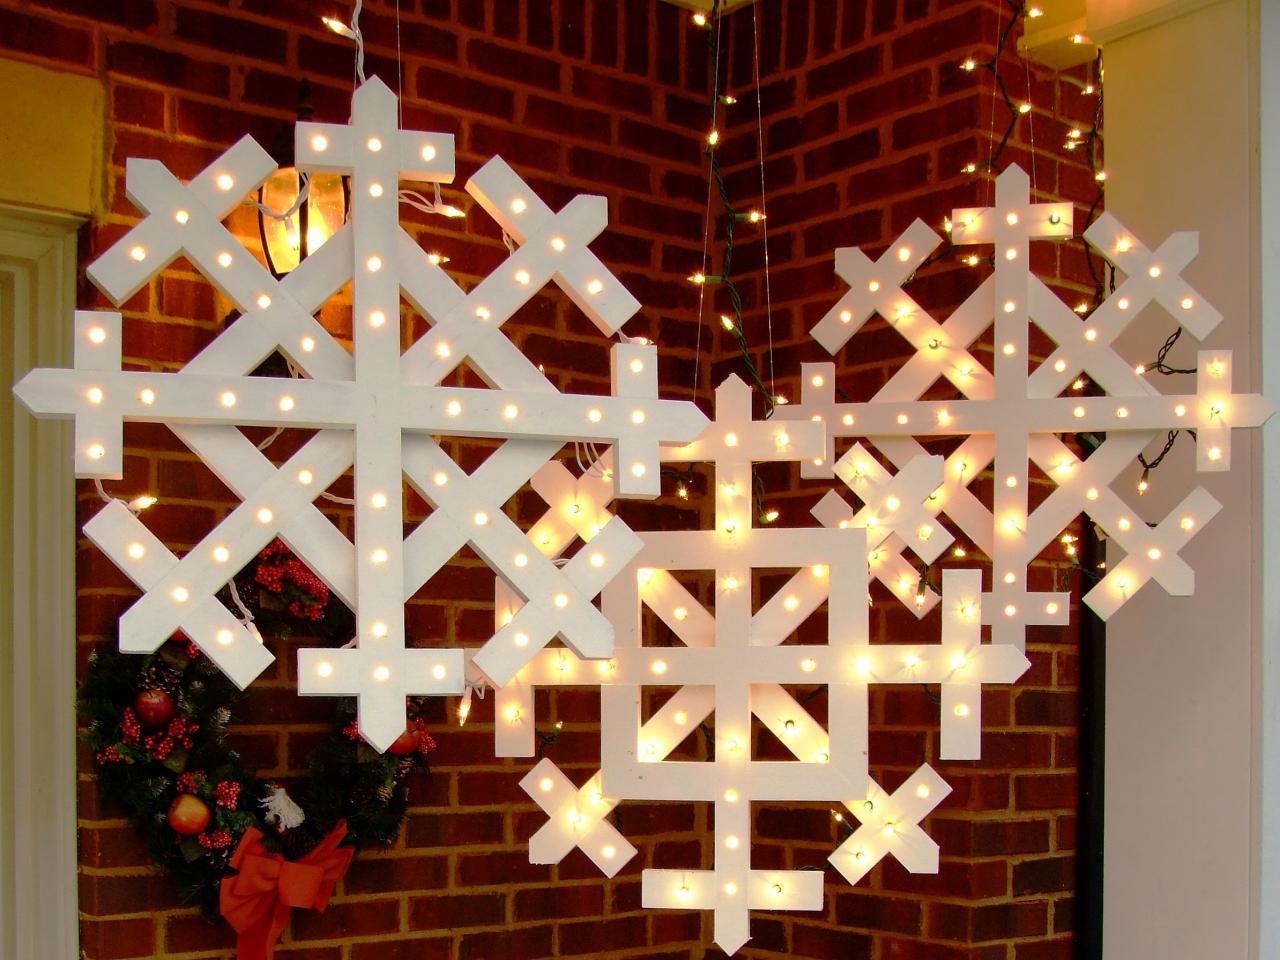 How to Make Wooden Snowflakes With Lights | how-tos | DIY